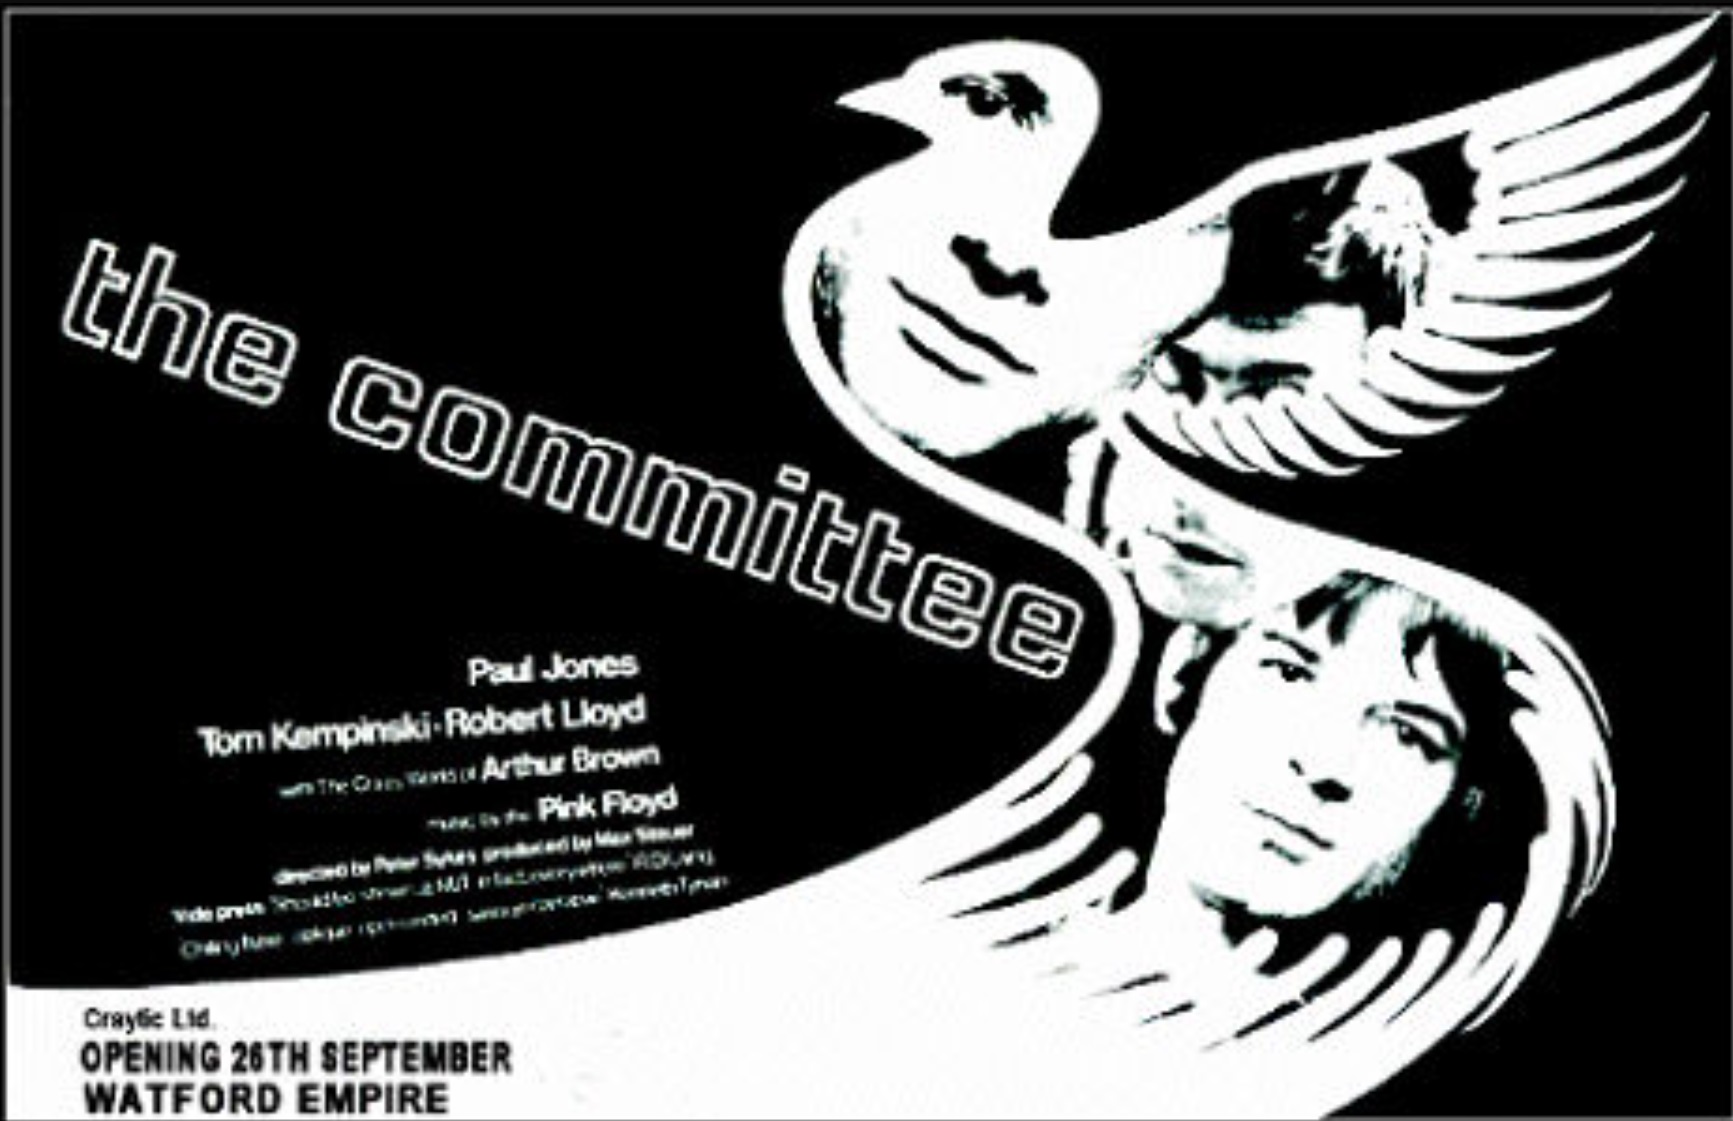 26 September 1968 The Committee Film Premiere at Watford Empire